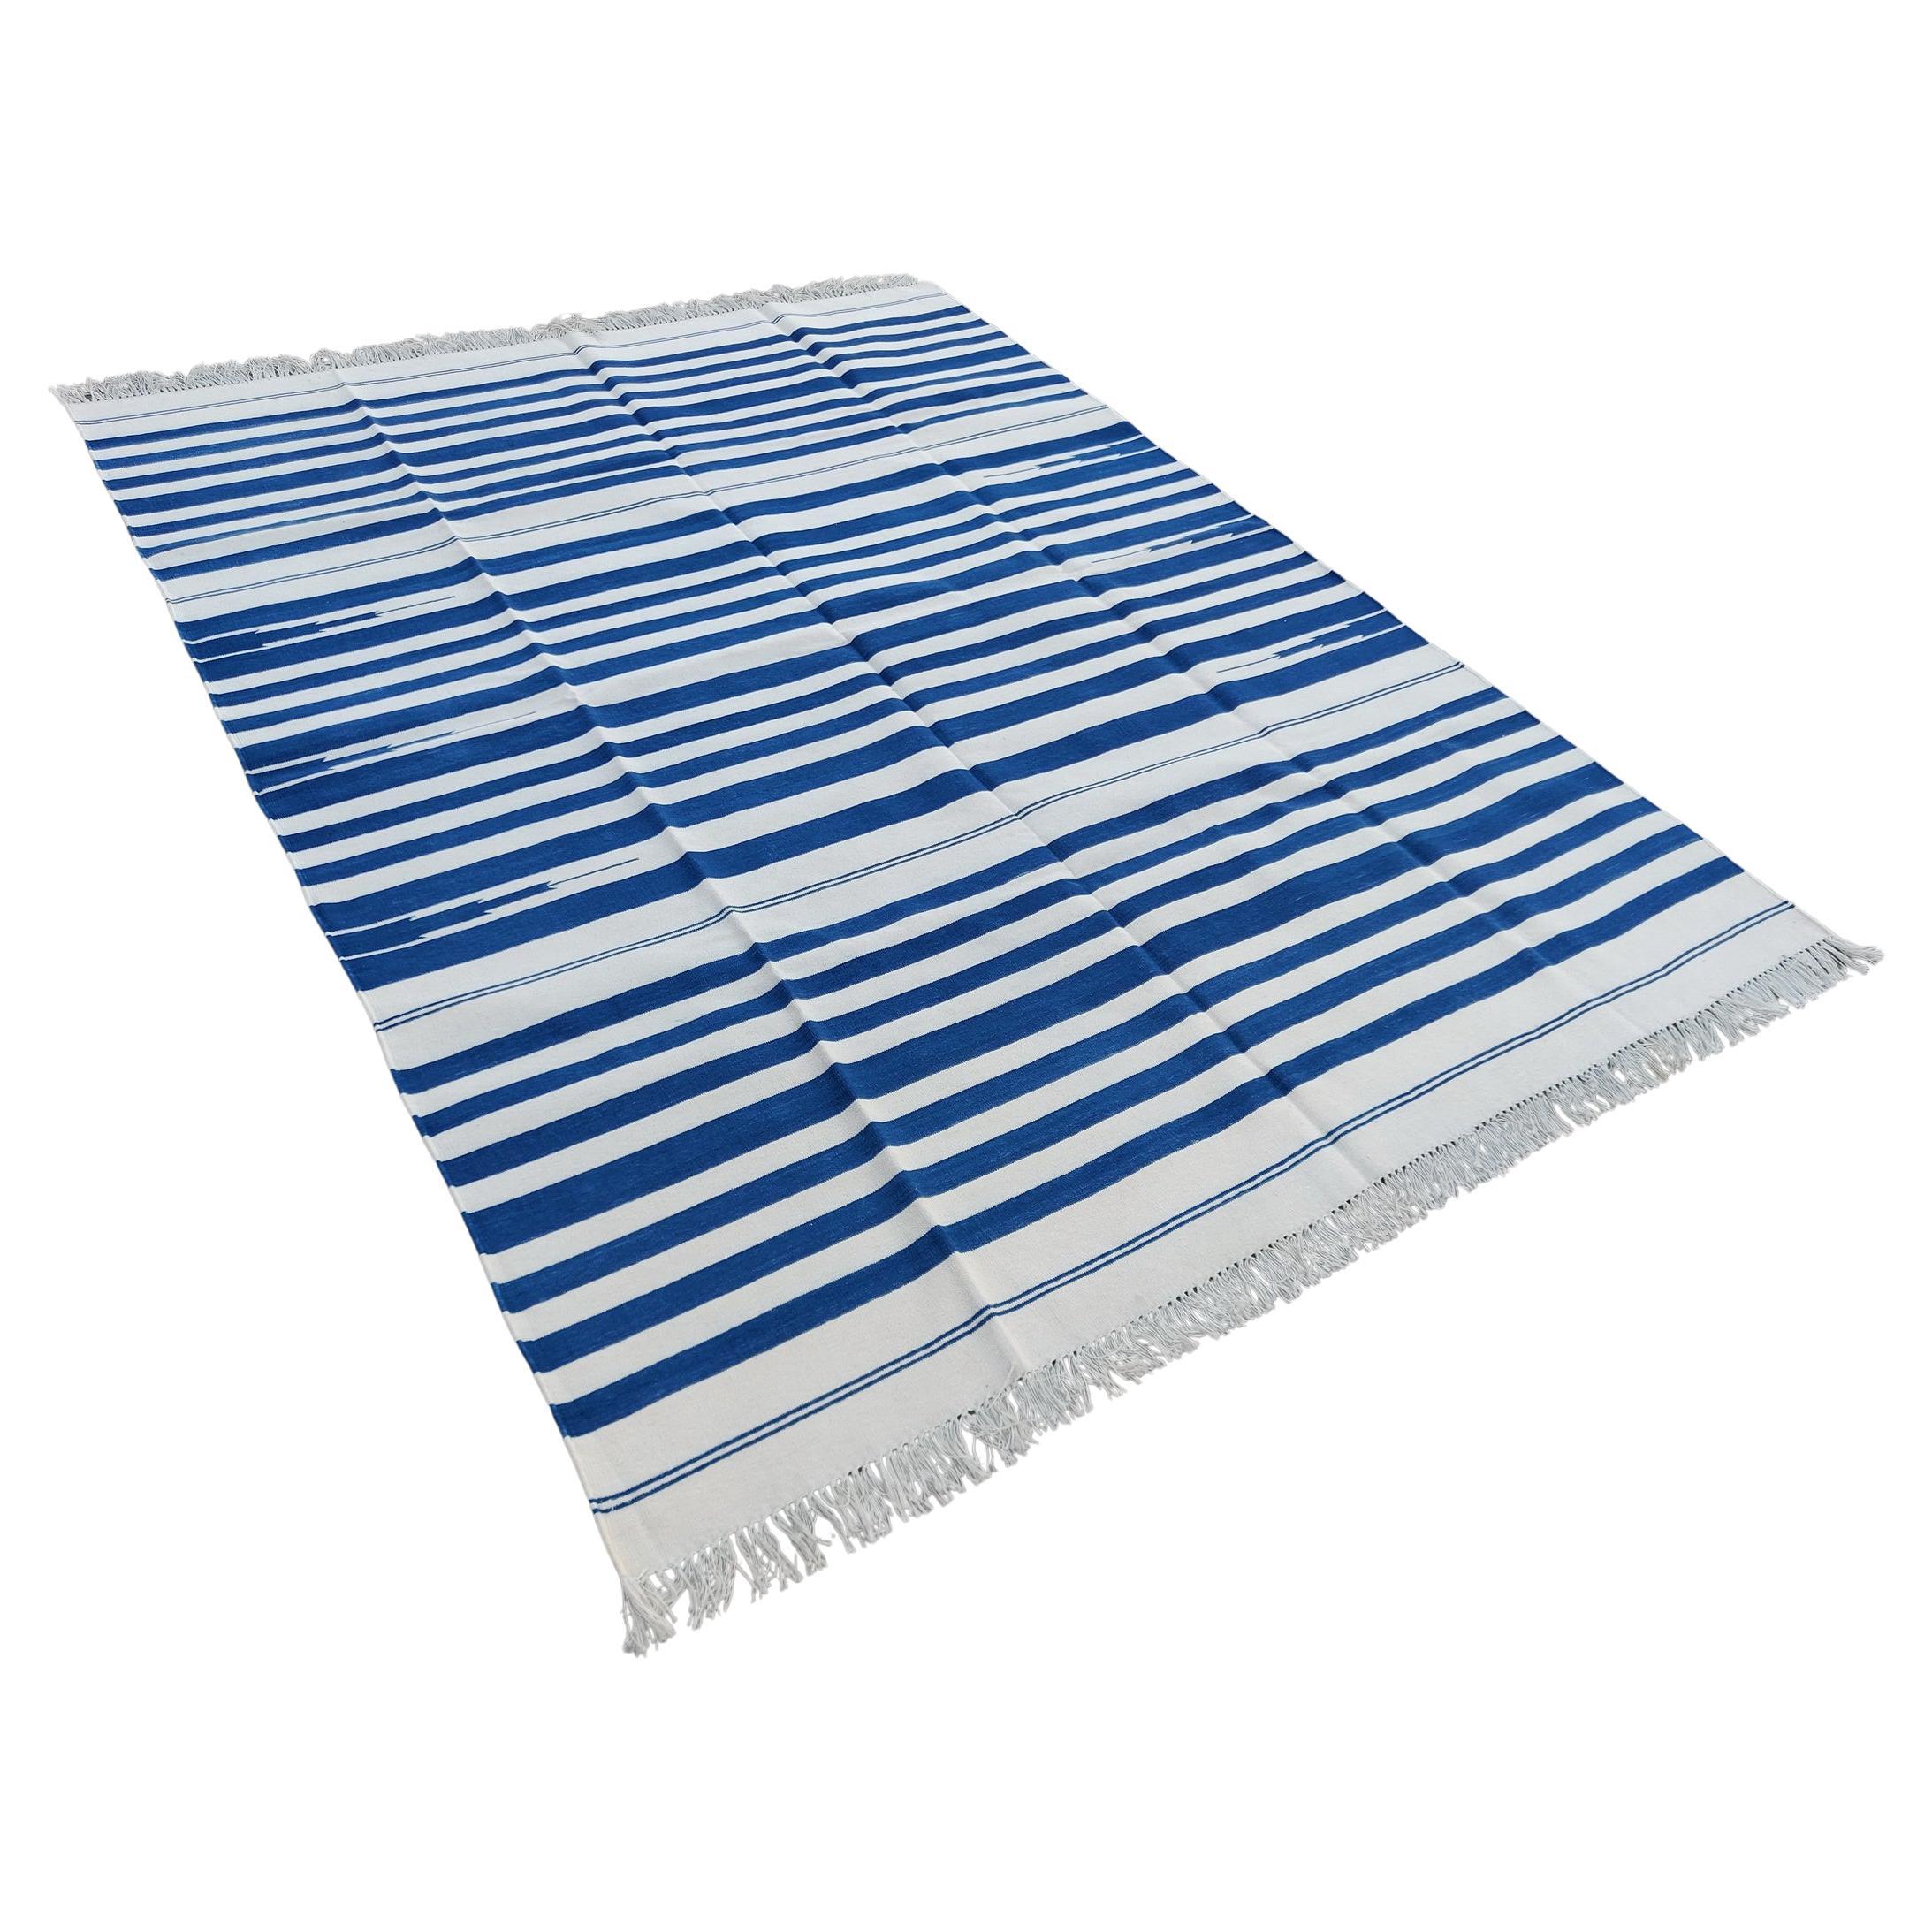 Handmade Cotton Area Flat Weave Rug, 6x8 Blue And White Striped Indian Dhurrie